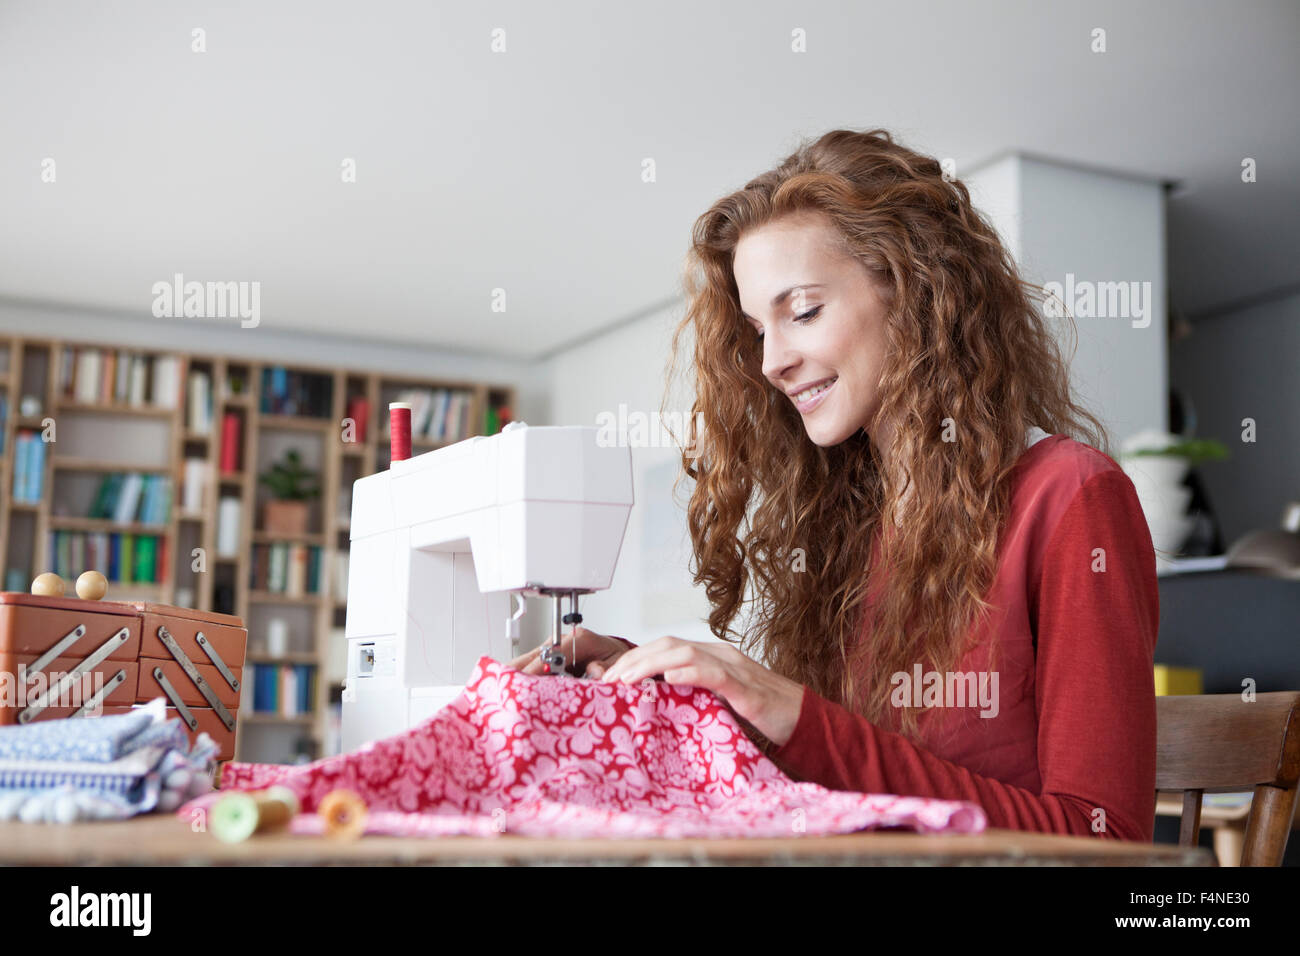 Smiling woman at home using sewing machine Stock Photo